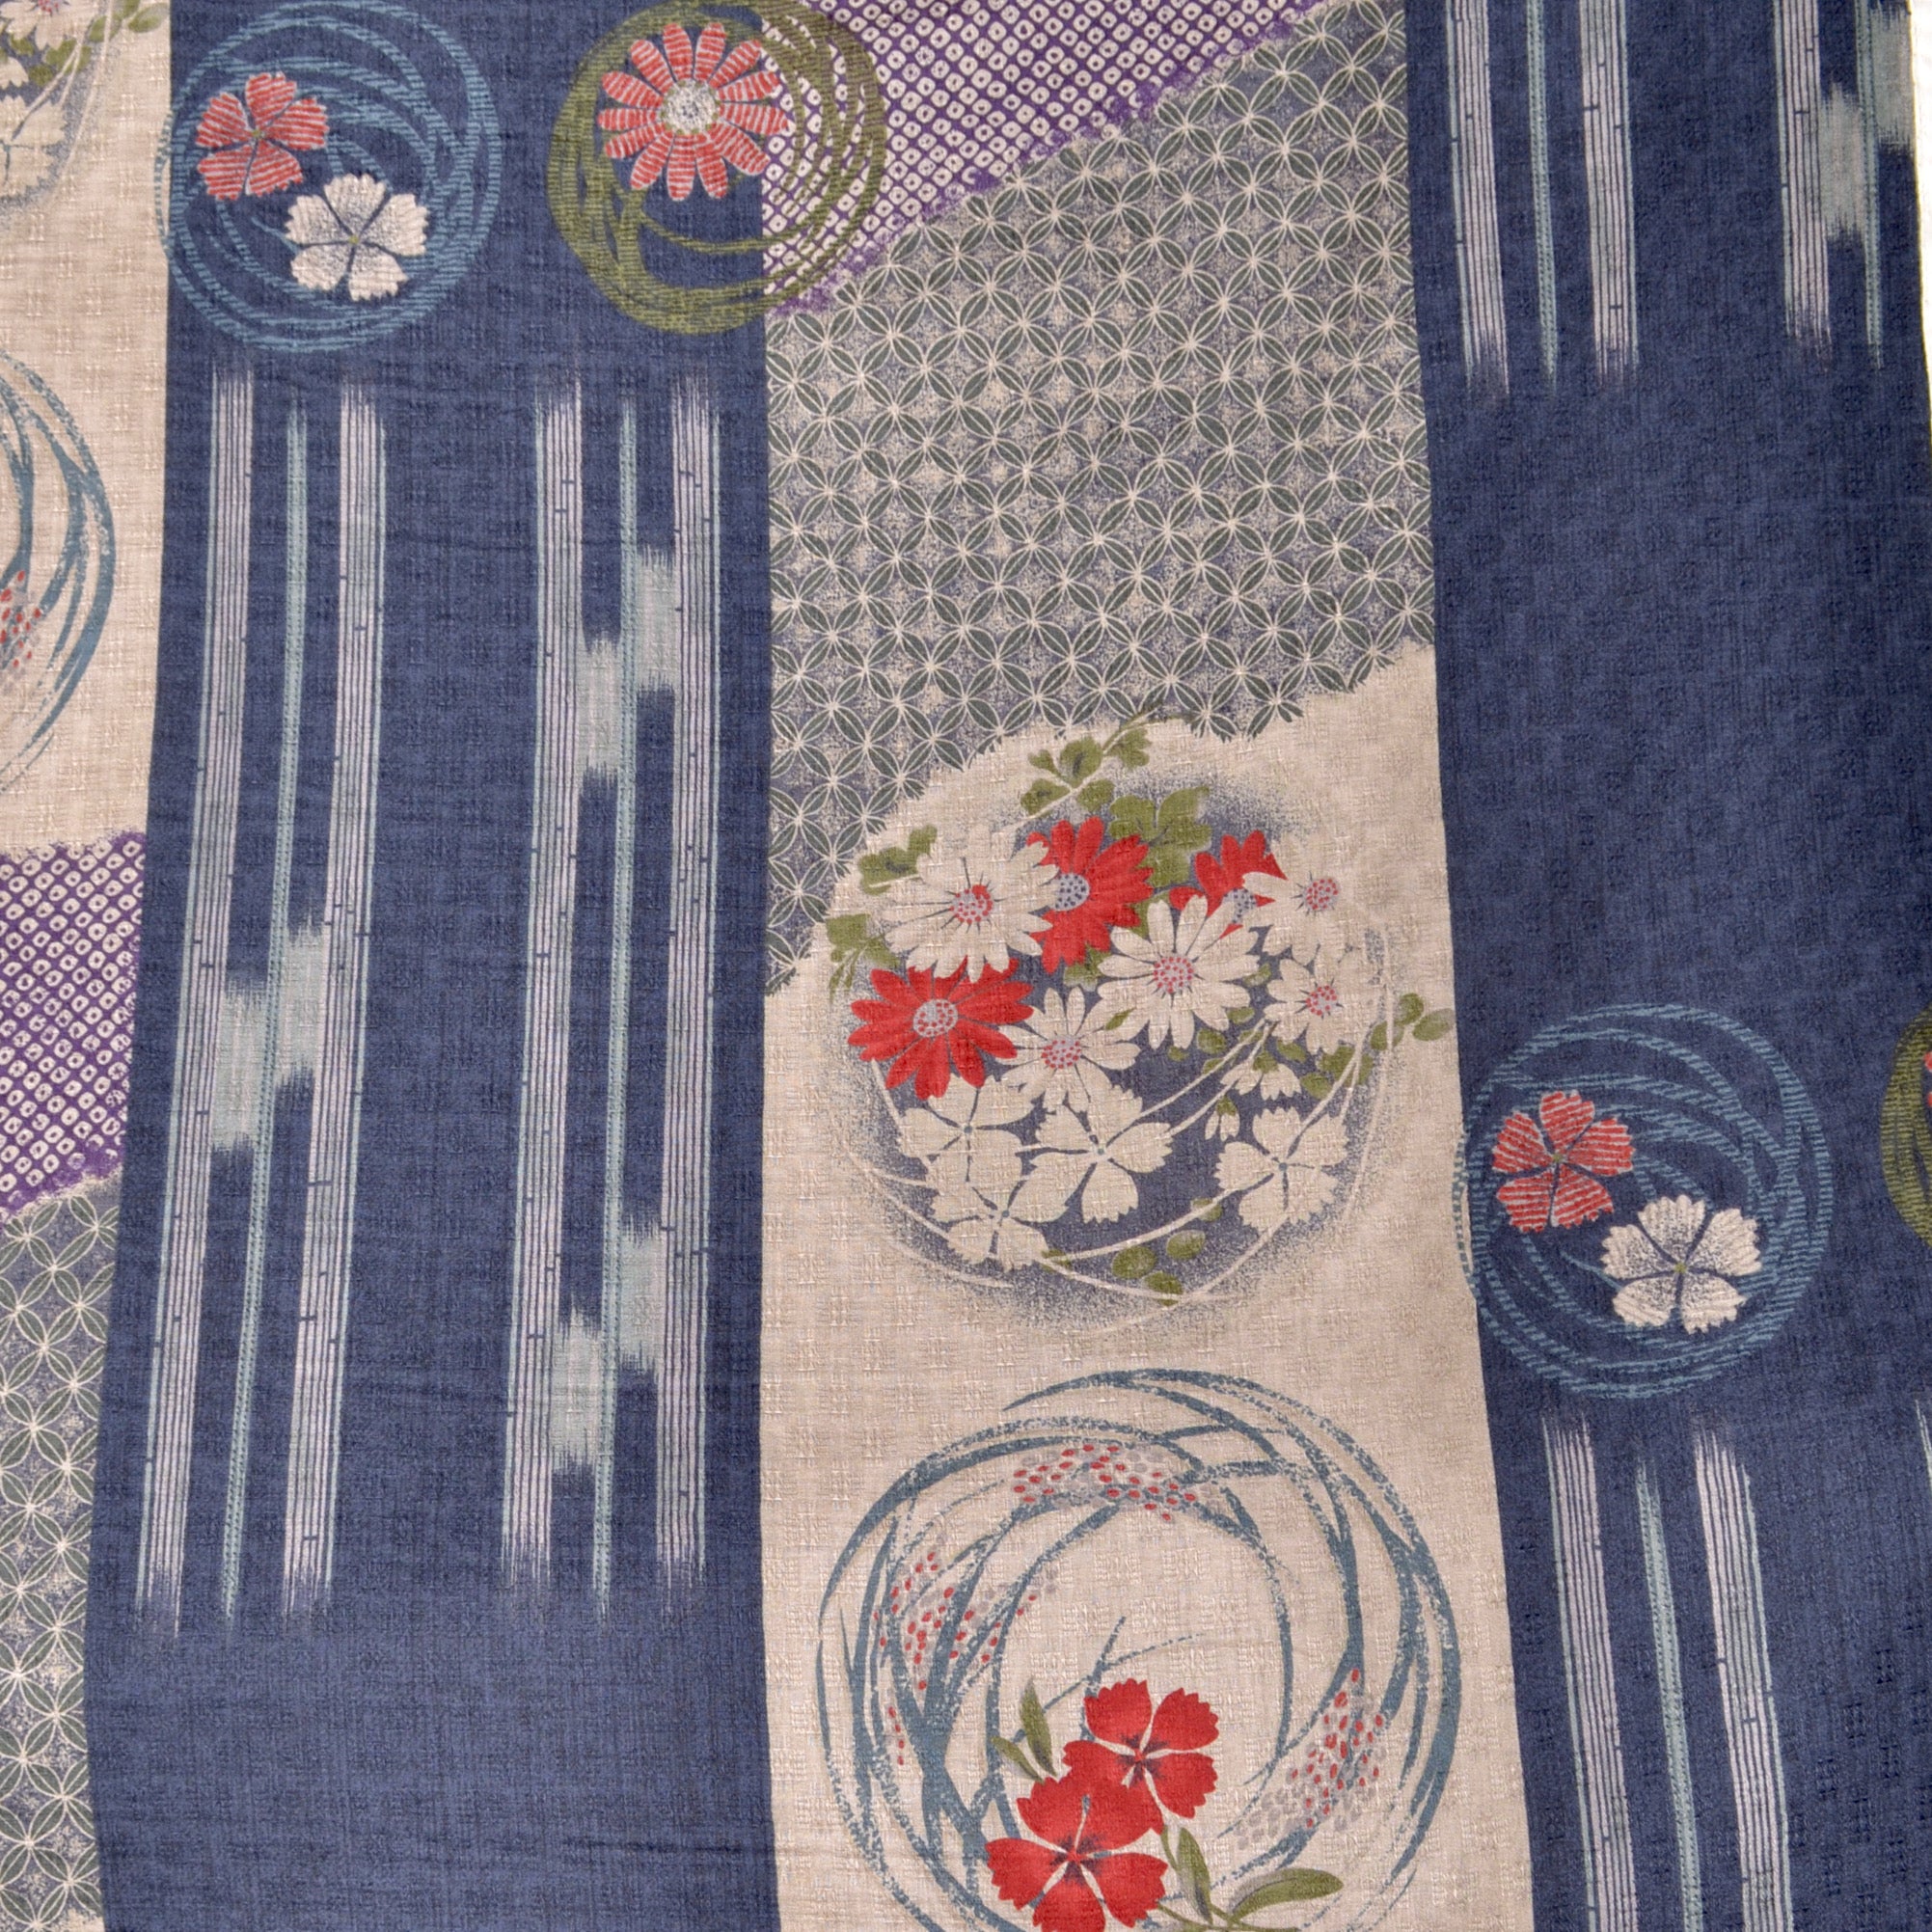 Japanese cotton Fabric suitable for sewing clothing and home sewing projects